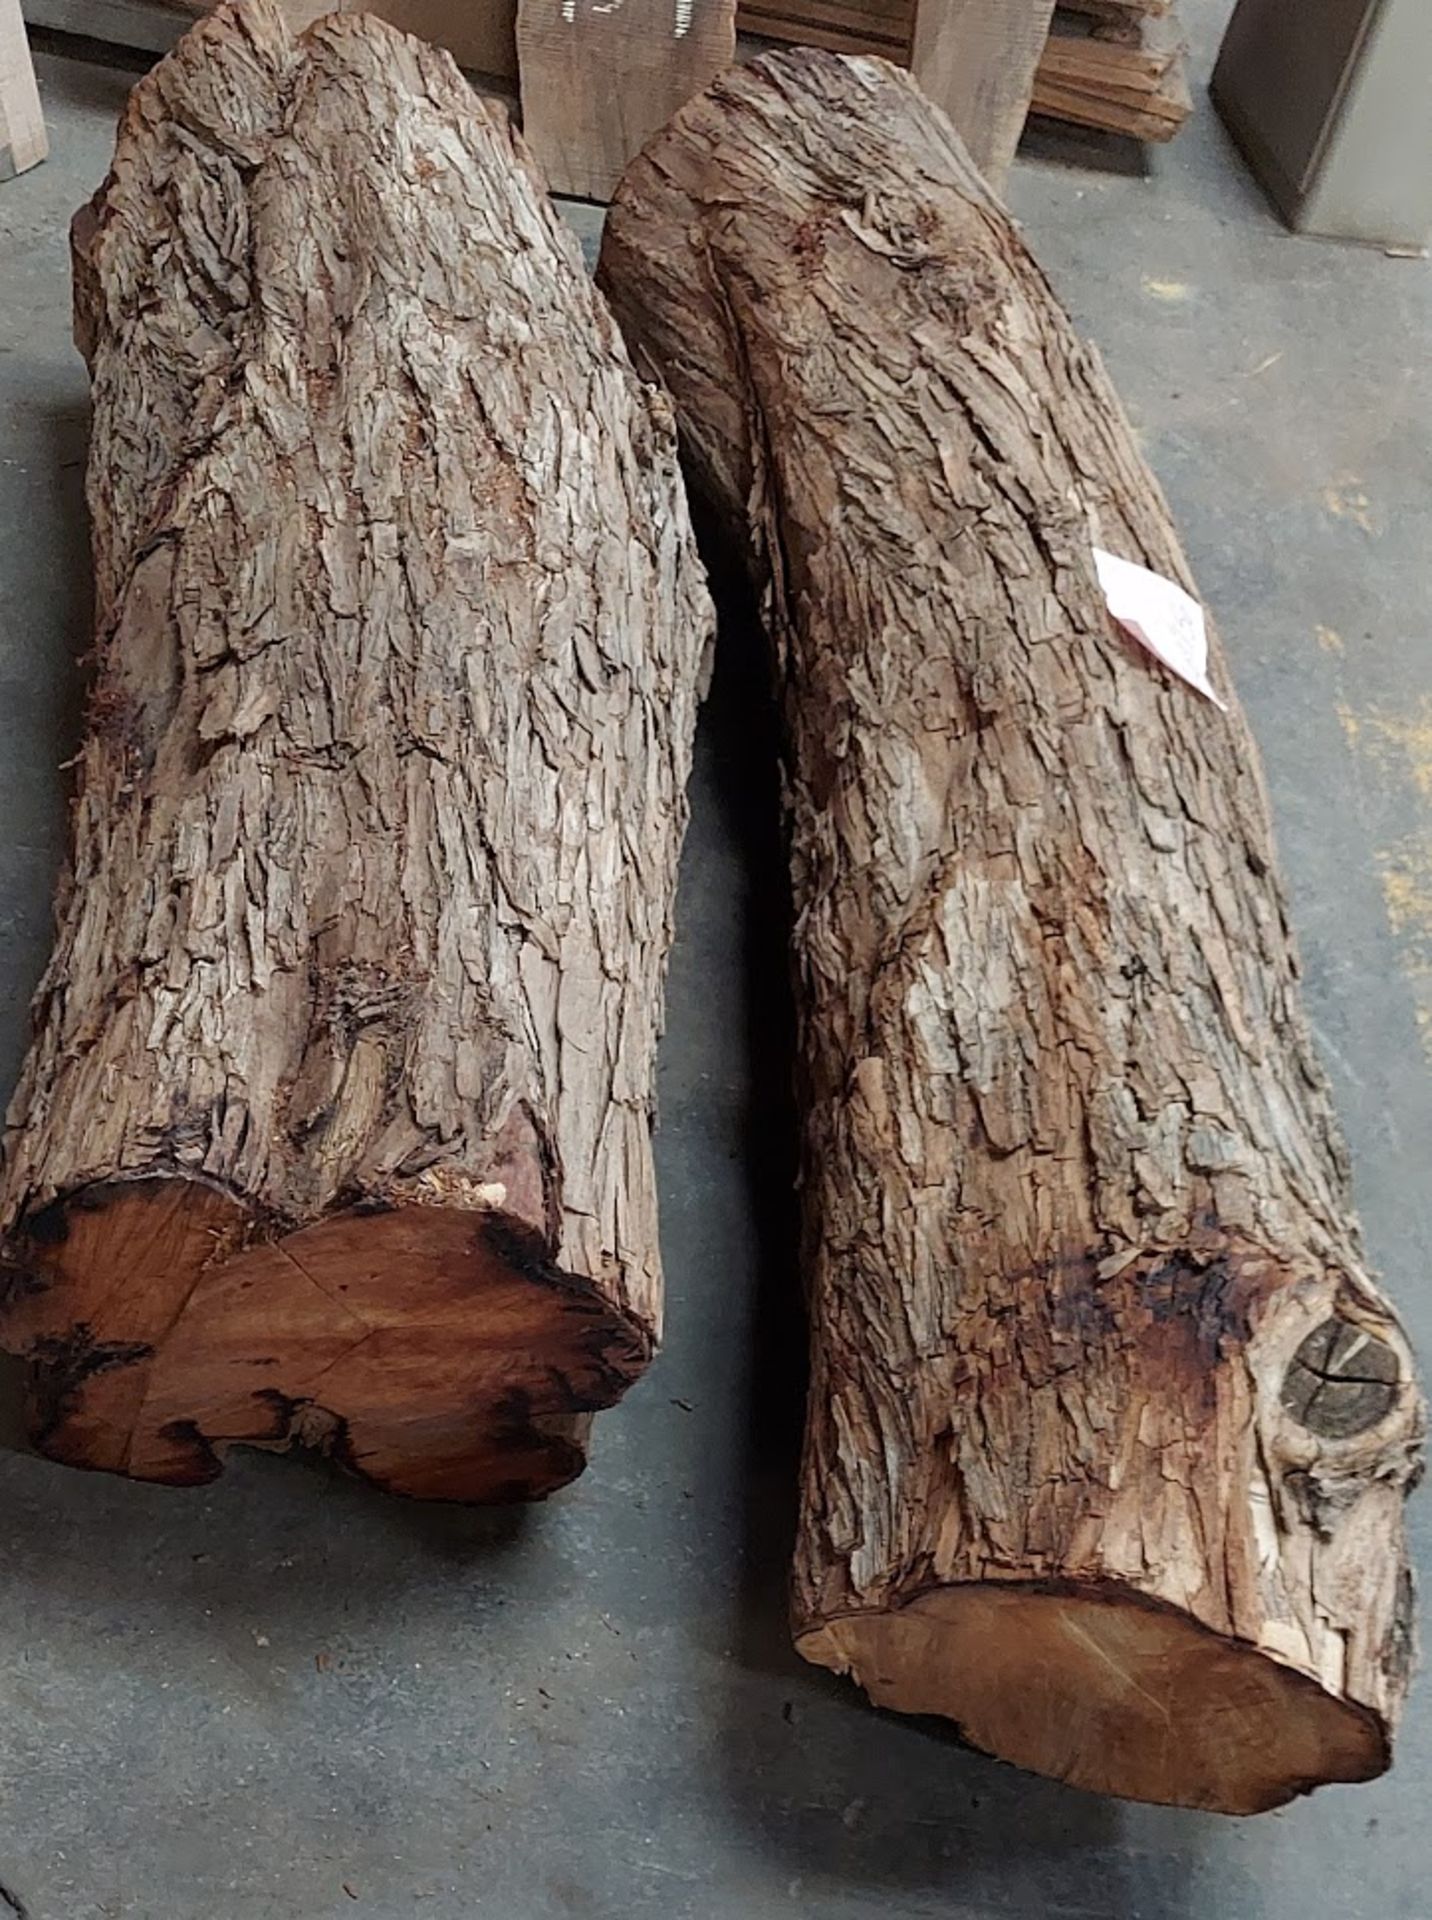 Lot of 2 Mesquite Logs 52" L x 15" Dia and 64" L x 14" Dia - Image 3 of 3